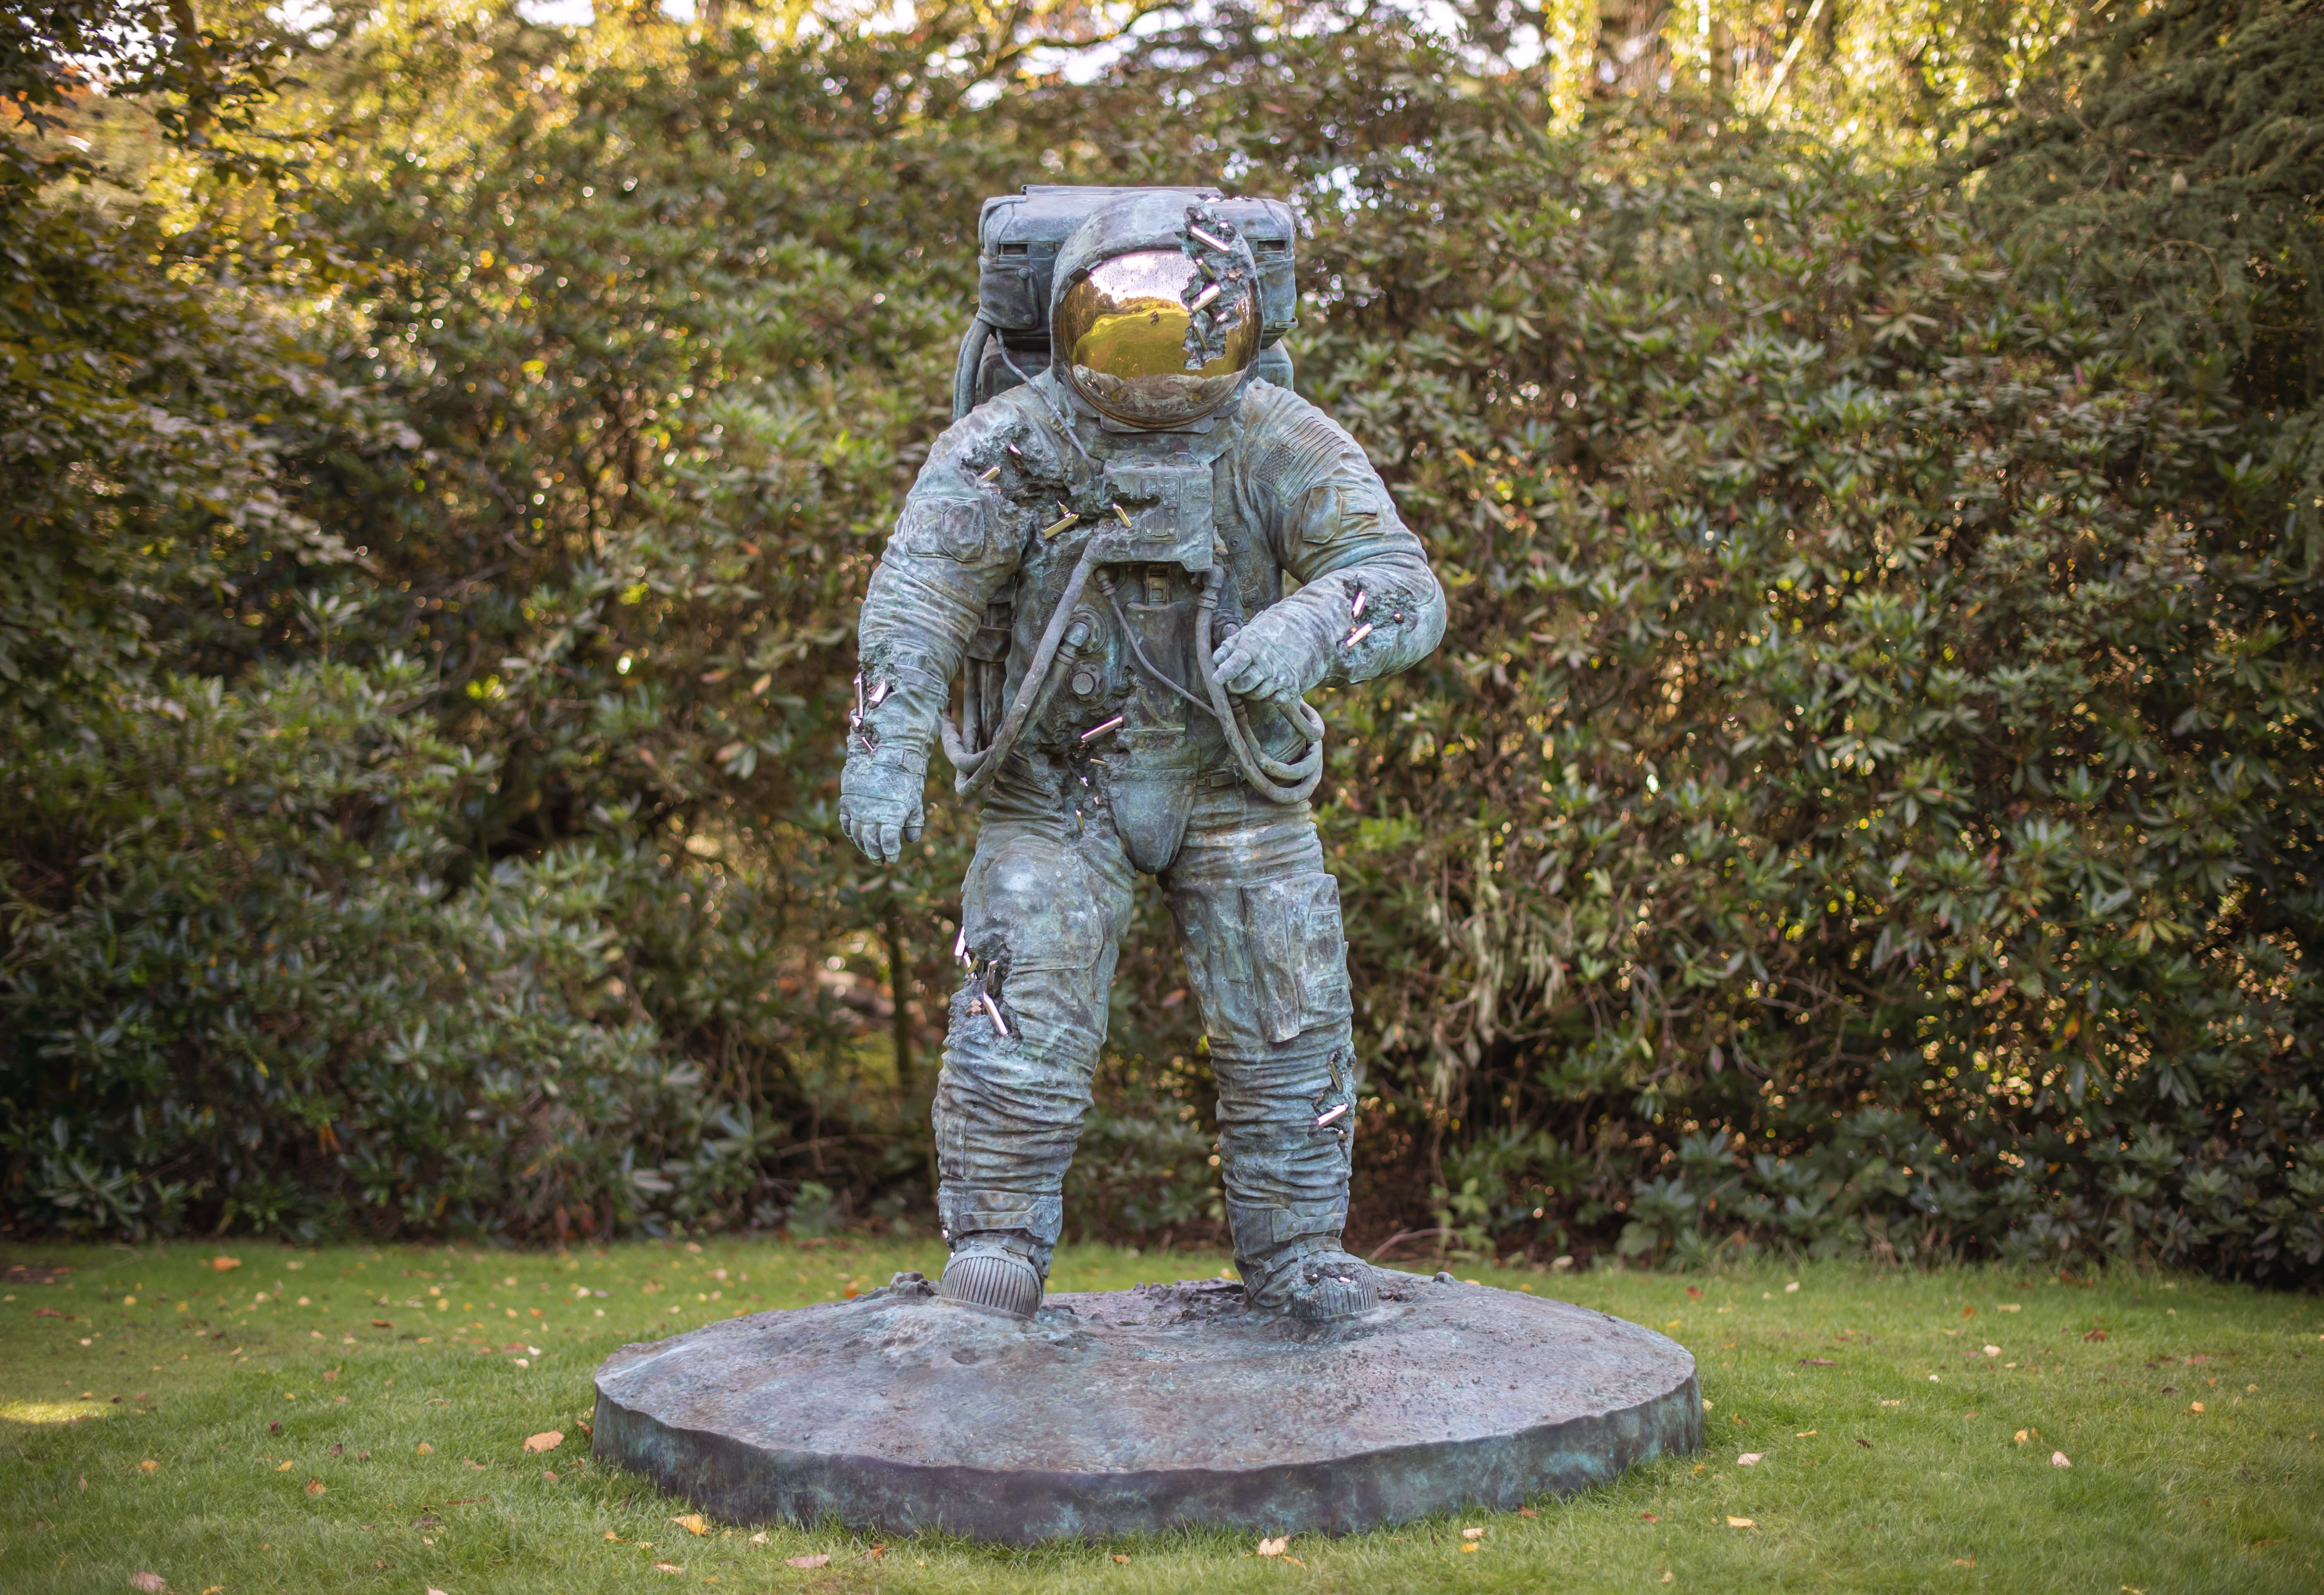 A bronze sculpture of an astronaut with crystal erosions coming out of the bronze.